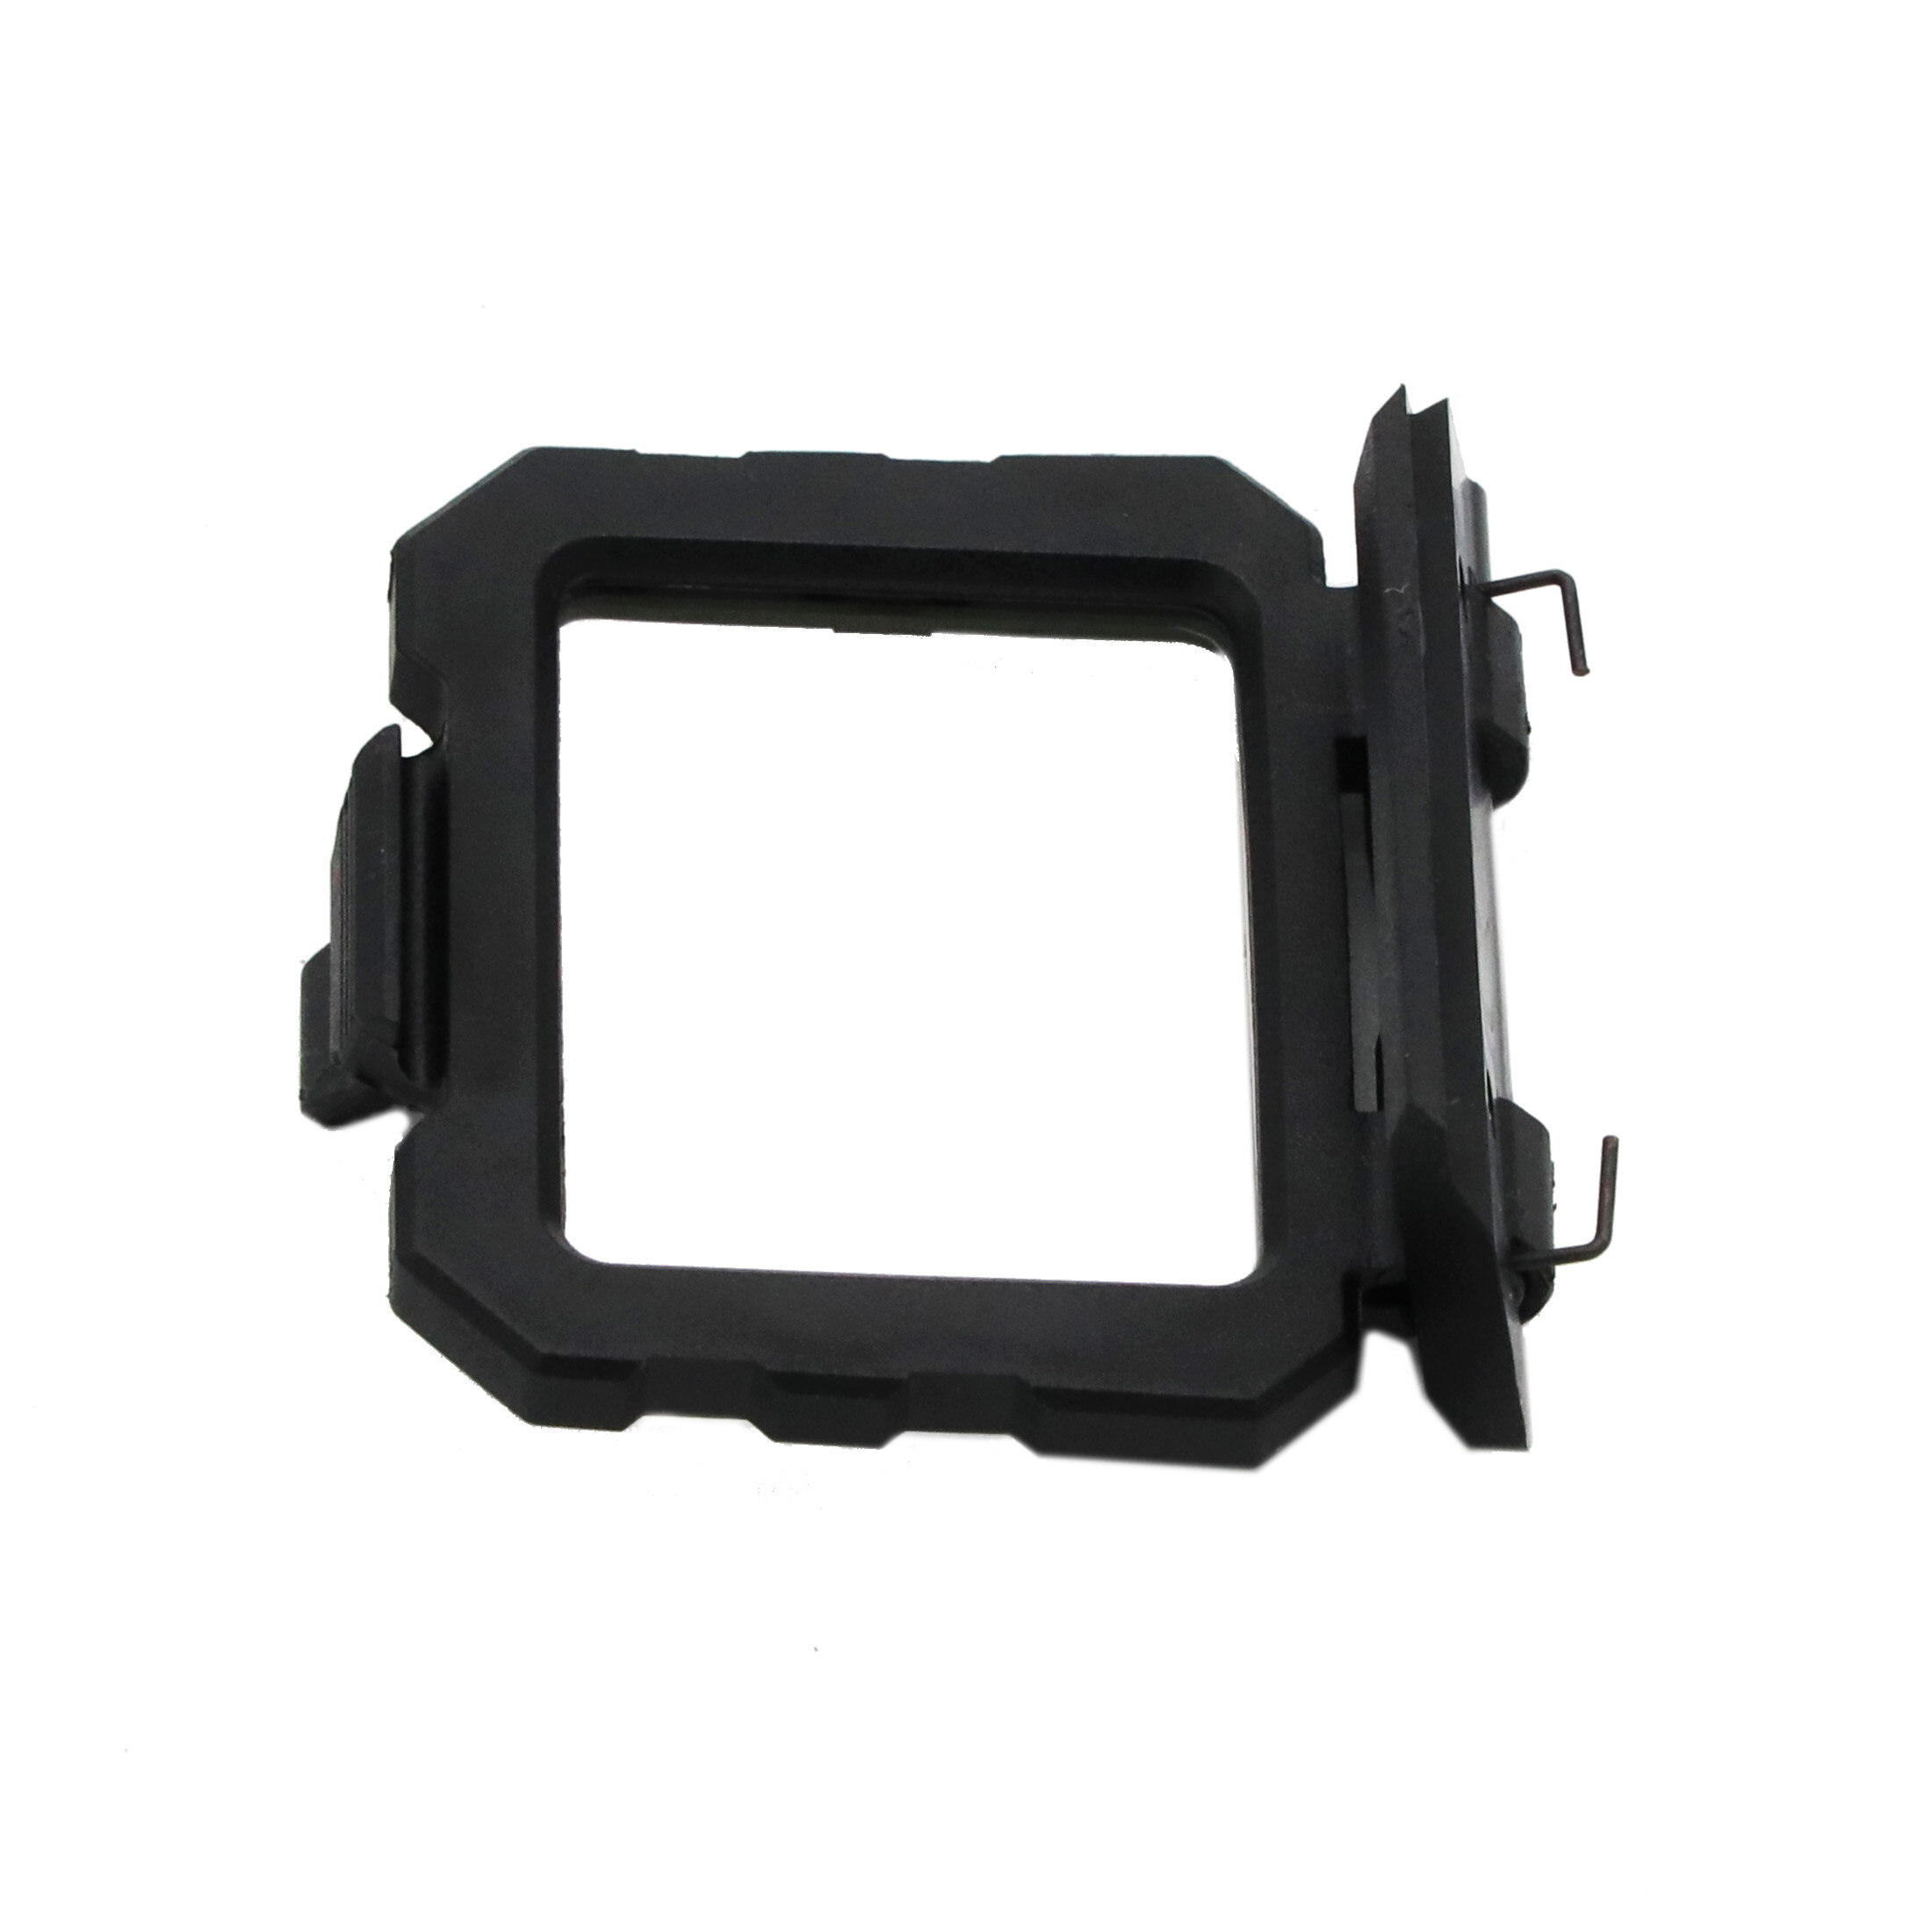 Holosun Flip Cap glass AEMS, accessory for Holosun red dot sights